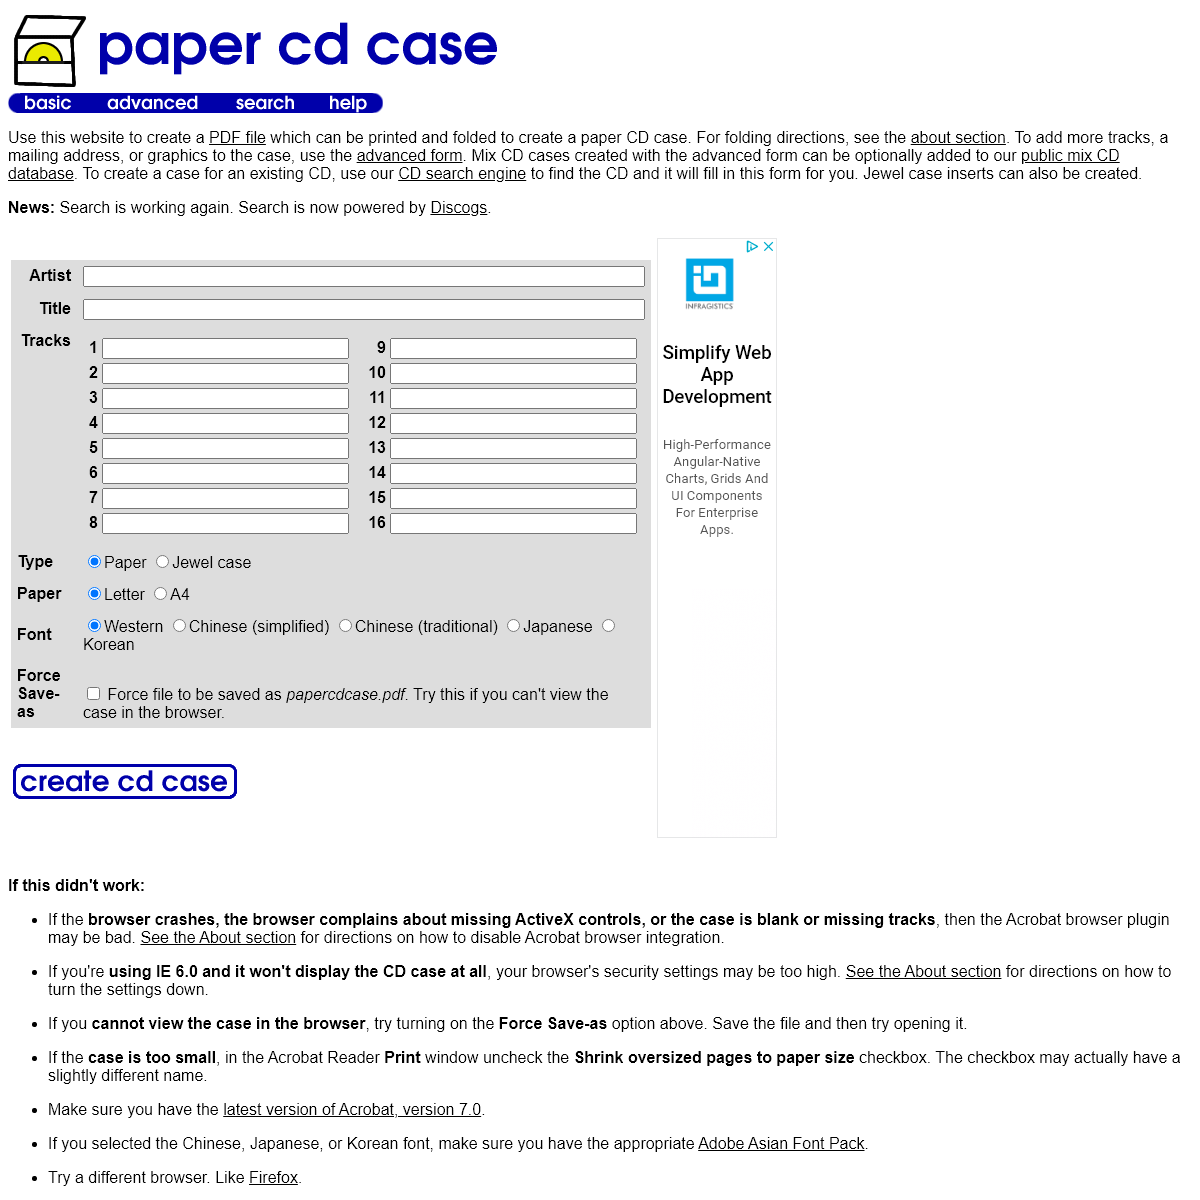 A complete backup of papercdcase.com